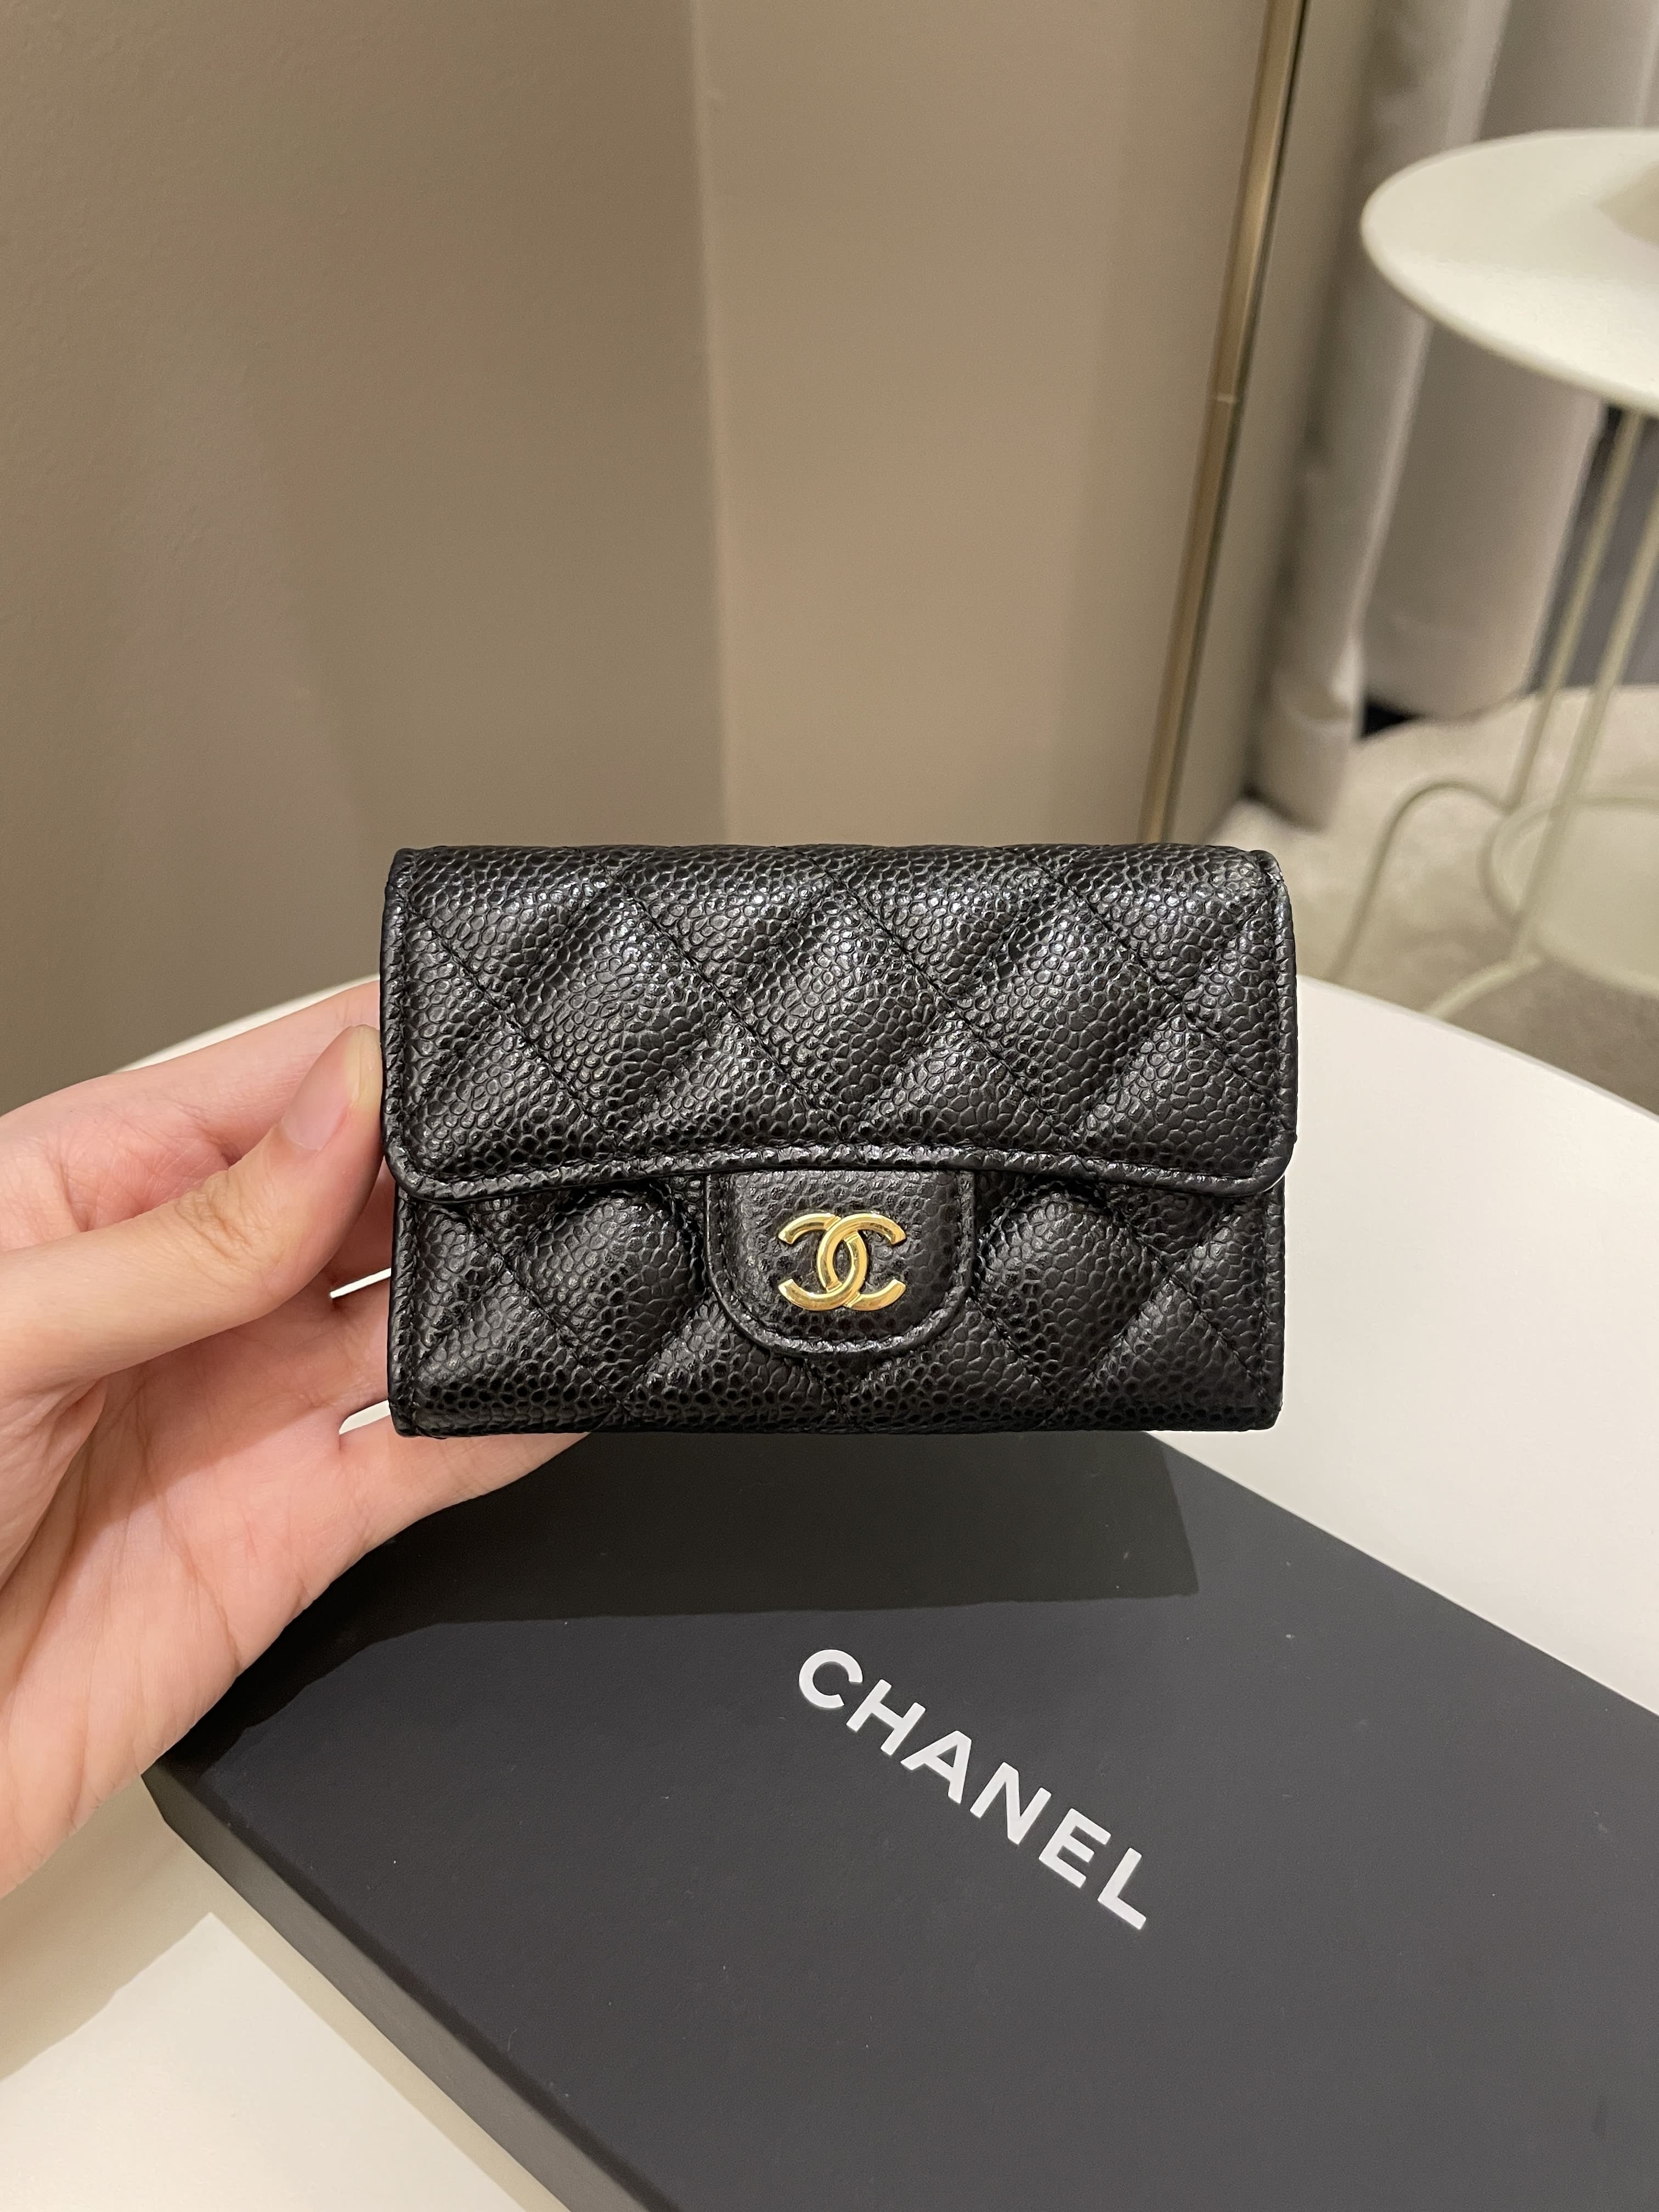 CHANEL, Bags, Chanel Classic Card Holder Wallet Caviar Black